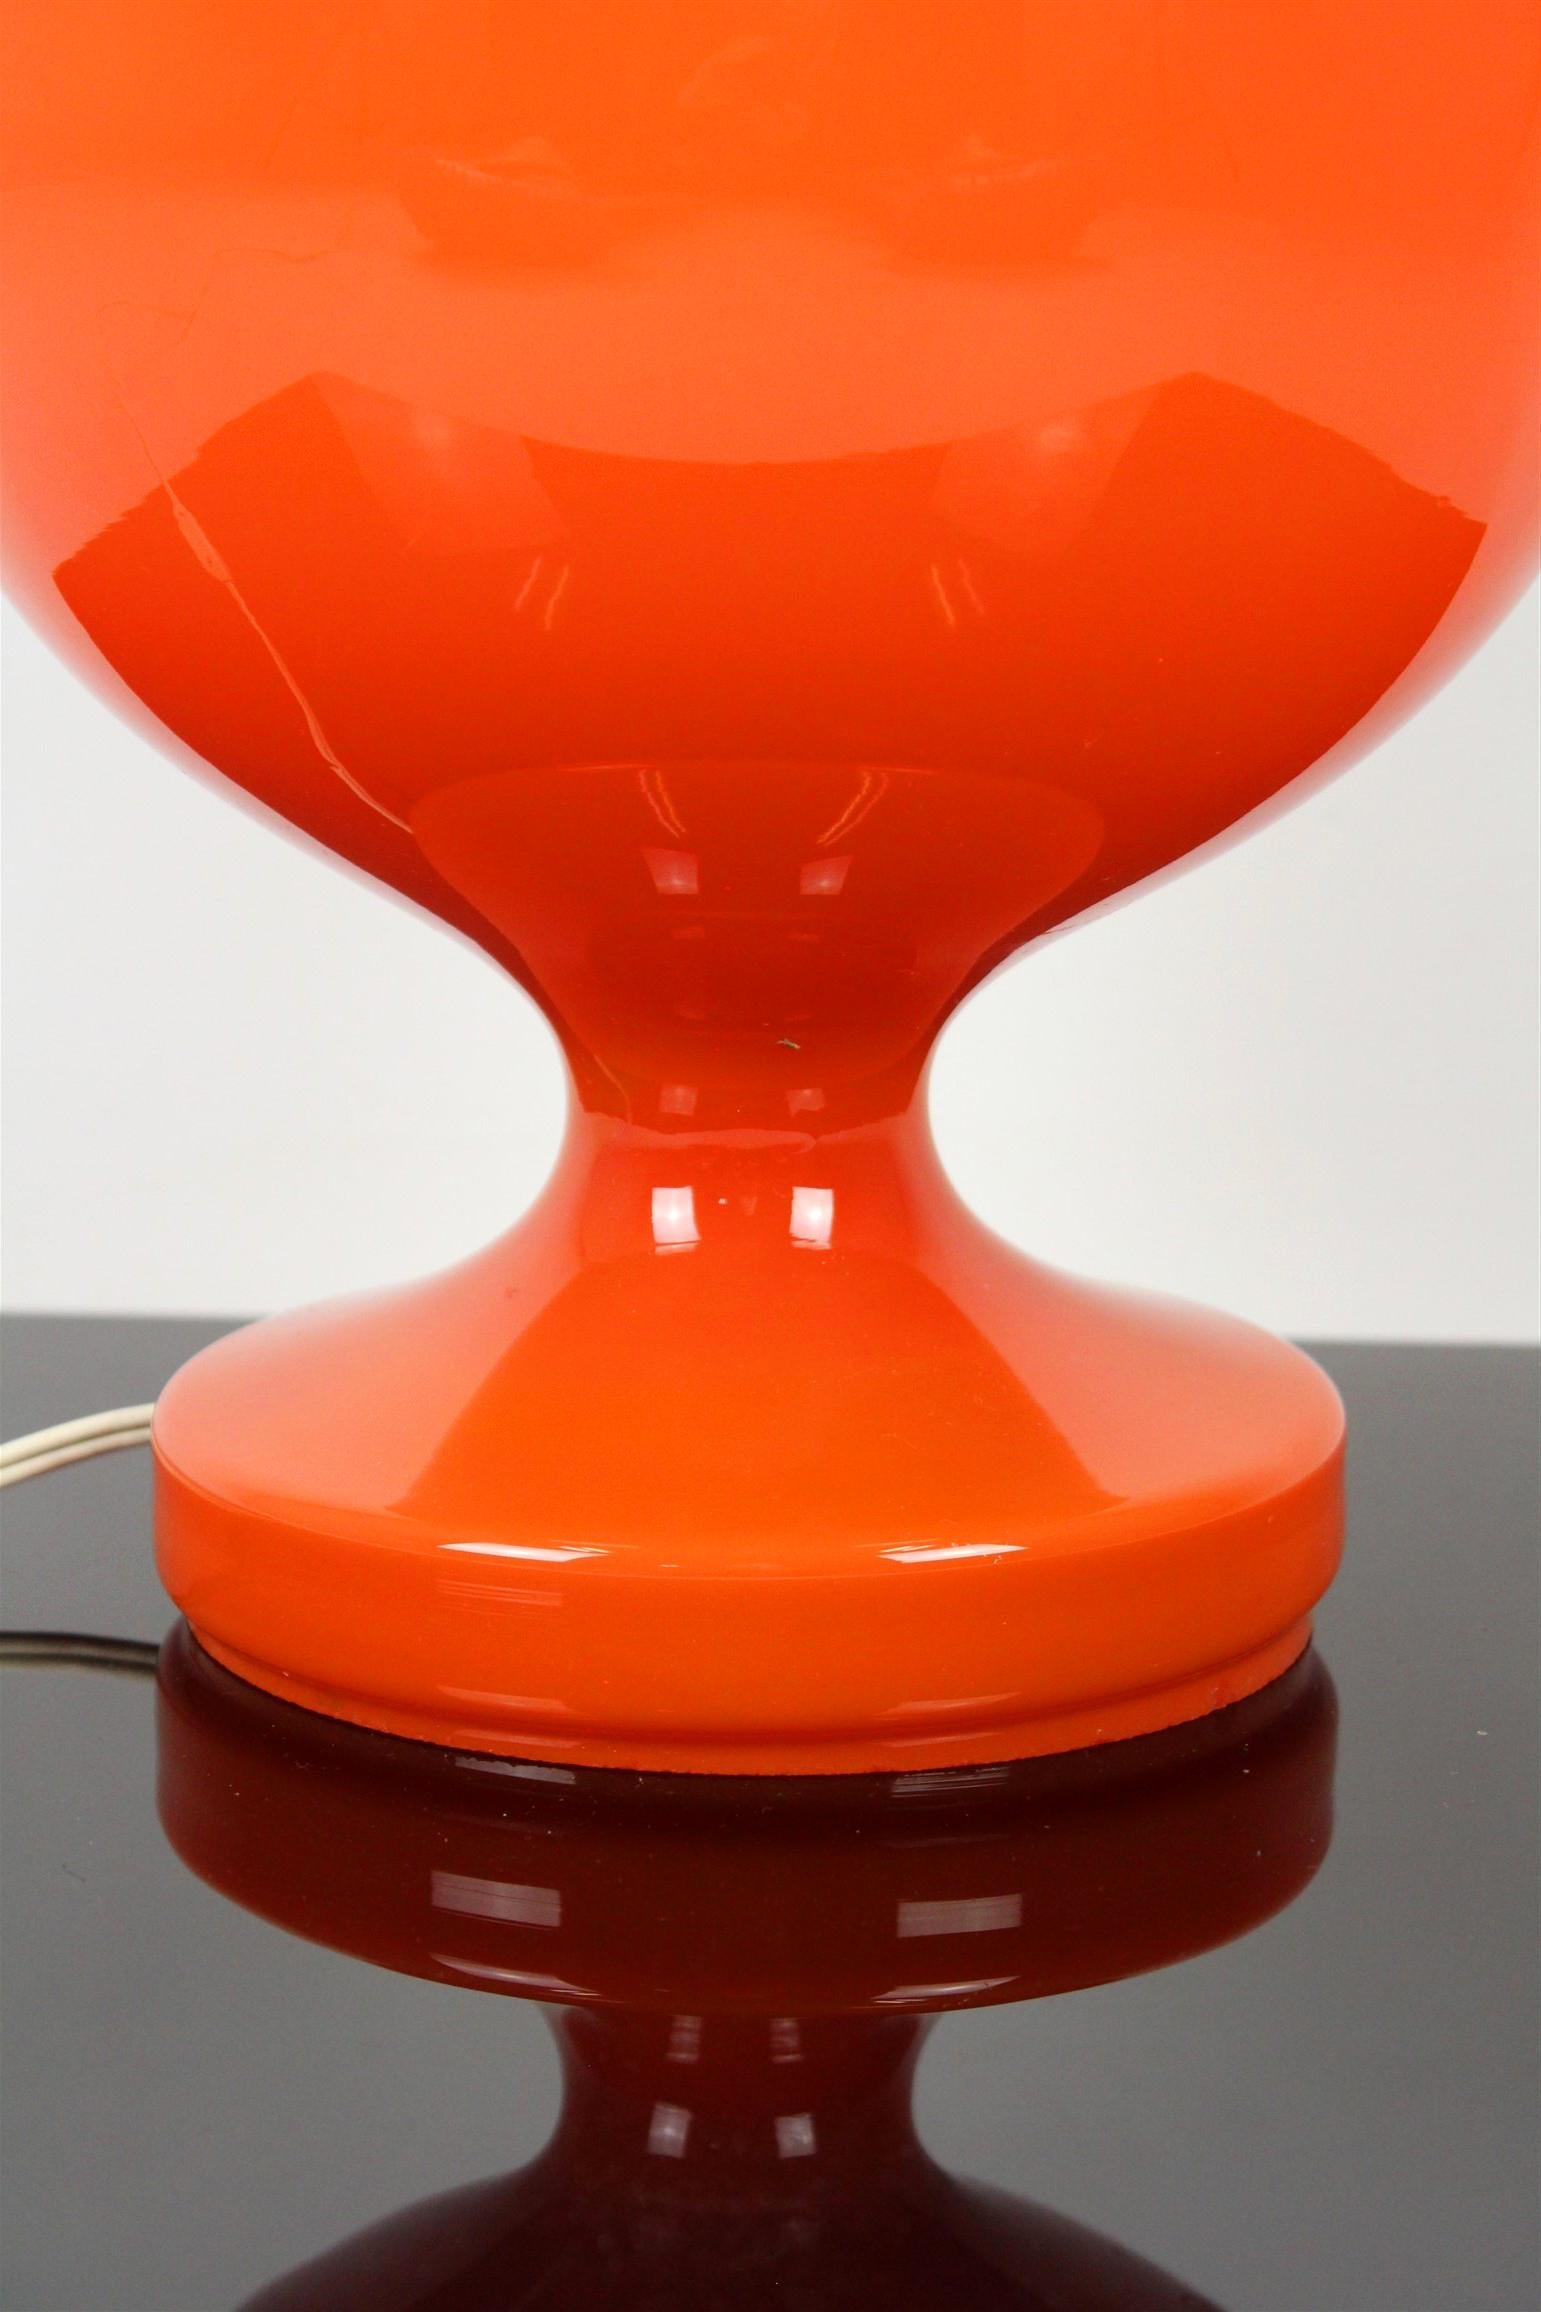 This glass table lamp was made by OPP Jihlava in Czechoslovakia in the 1970s.
The lamp is fully functional.